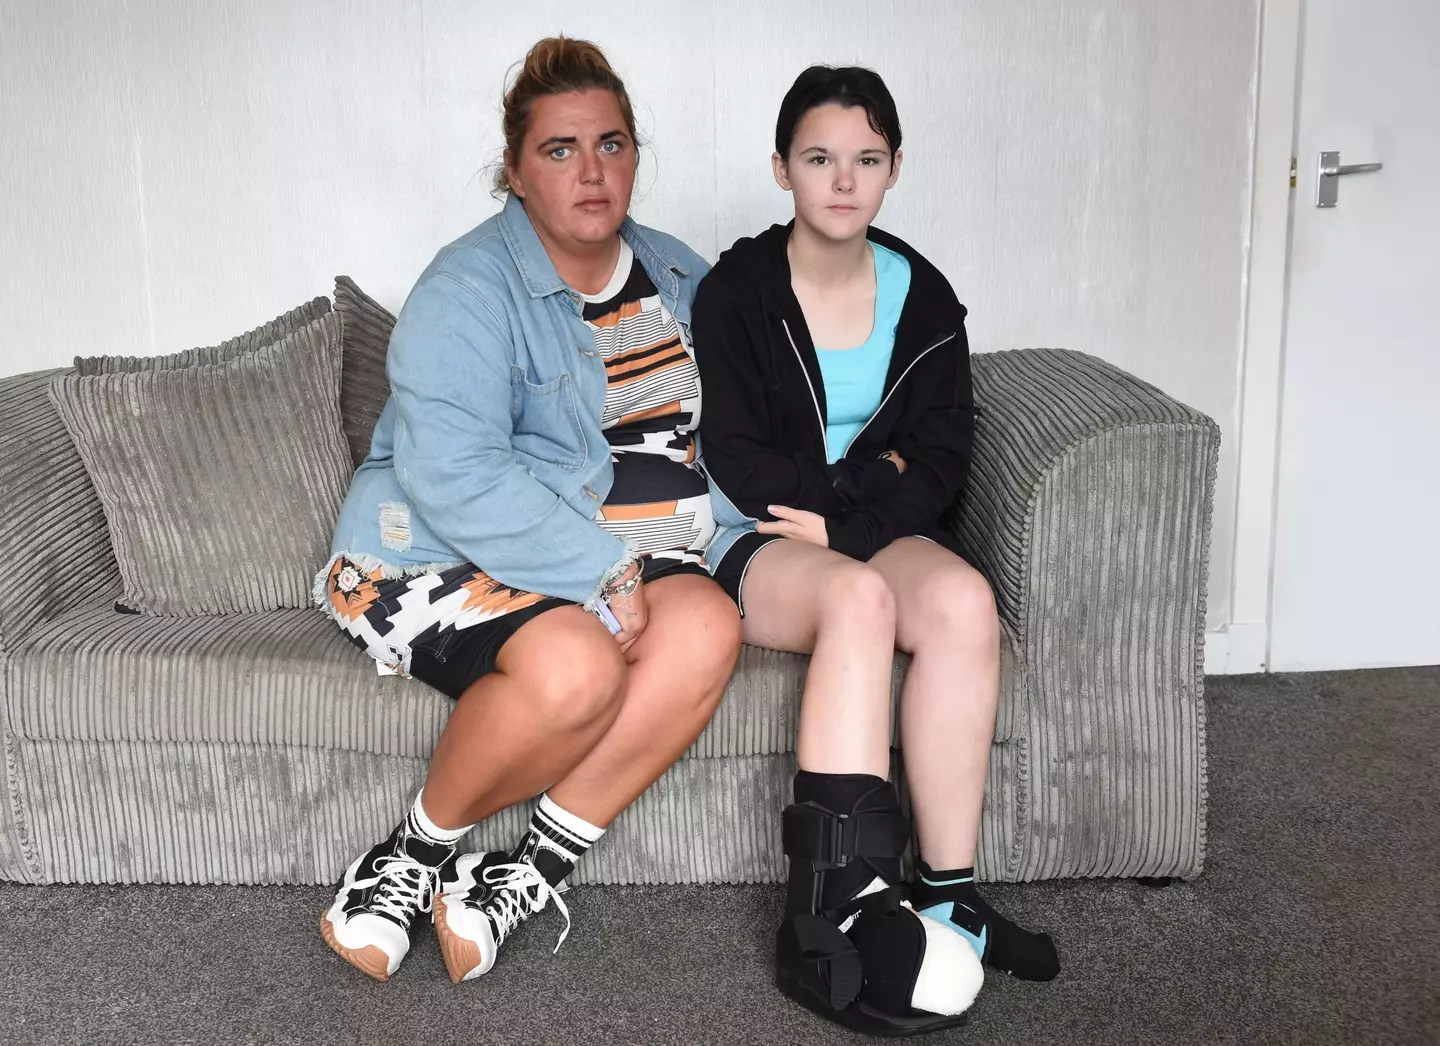 Millie's mum, Ashley, said her daughter's toe 'had been completely ripped off'.